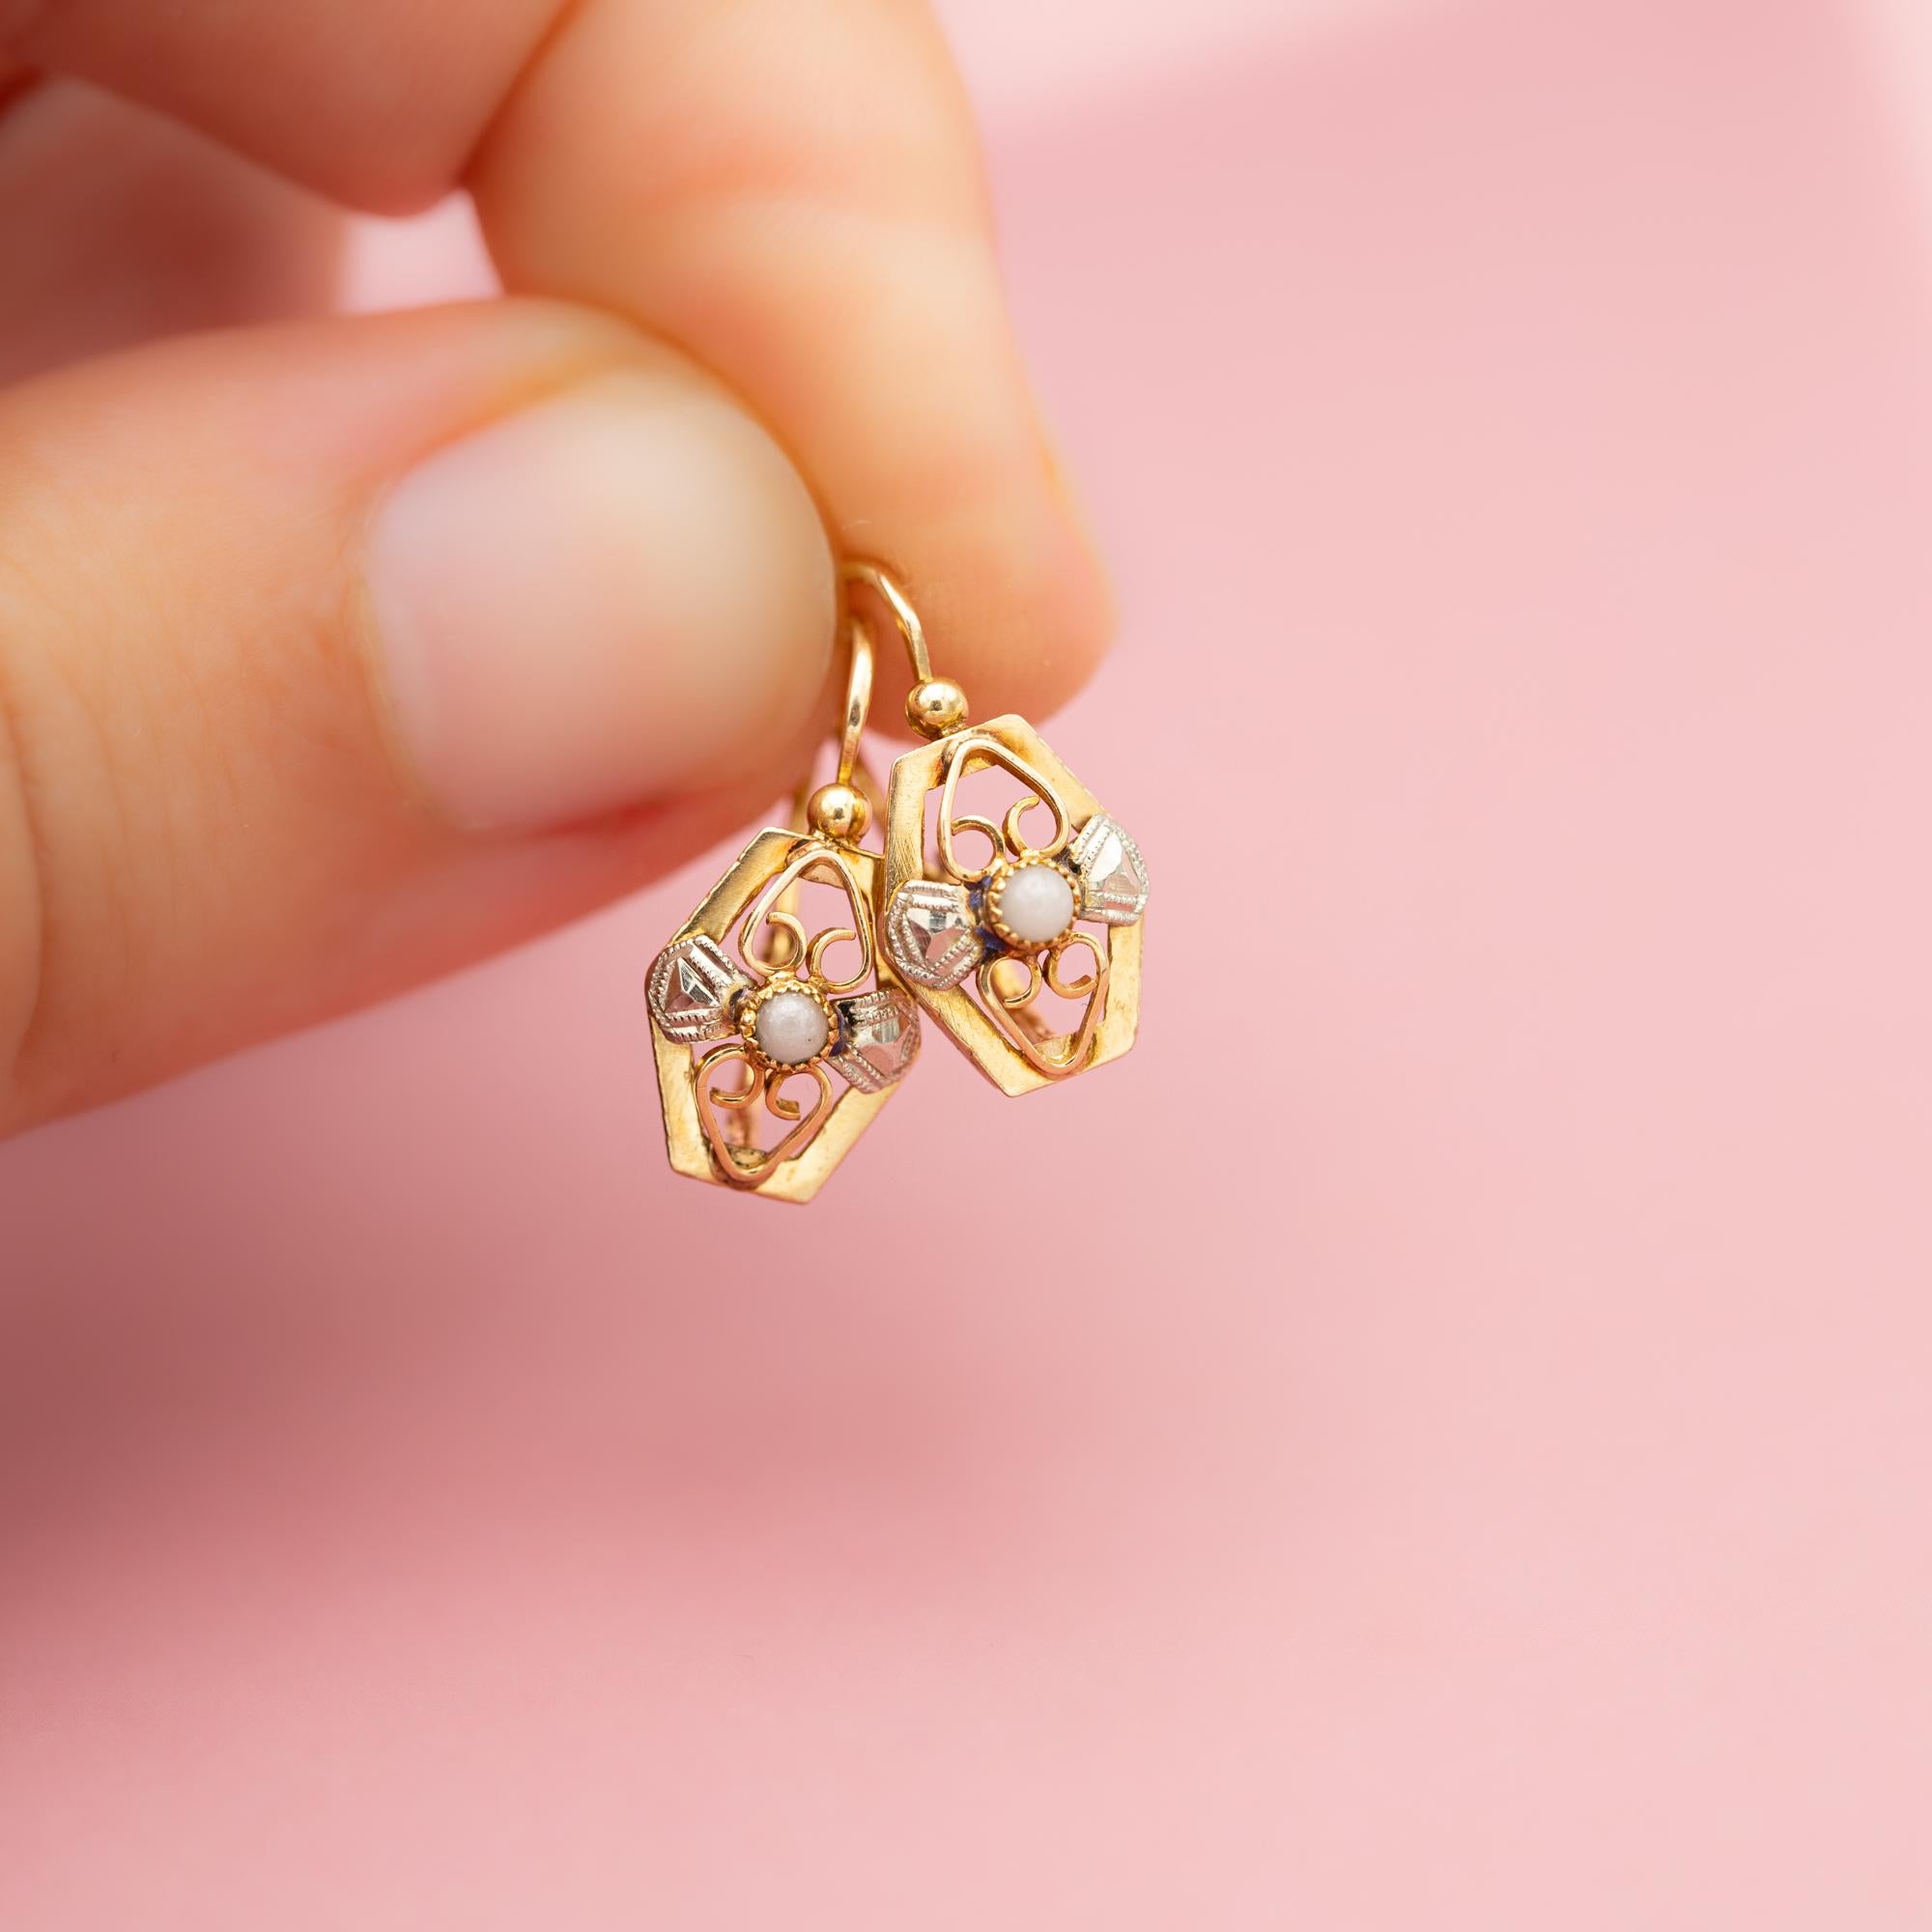 For sale are these cute French Napoleon III earrings. These 18 ct yellow gold dormeuse earrings (also called sleepers) have a front closure and are decorated with flower shaped ornaments, little seed pearls and finished with a lot of detail. The